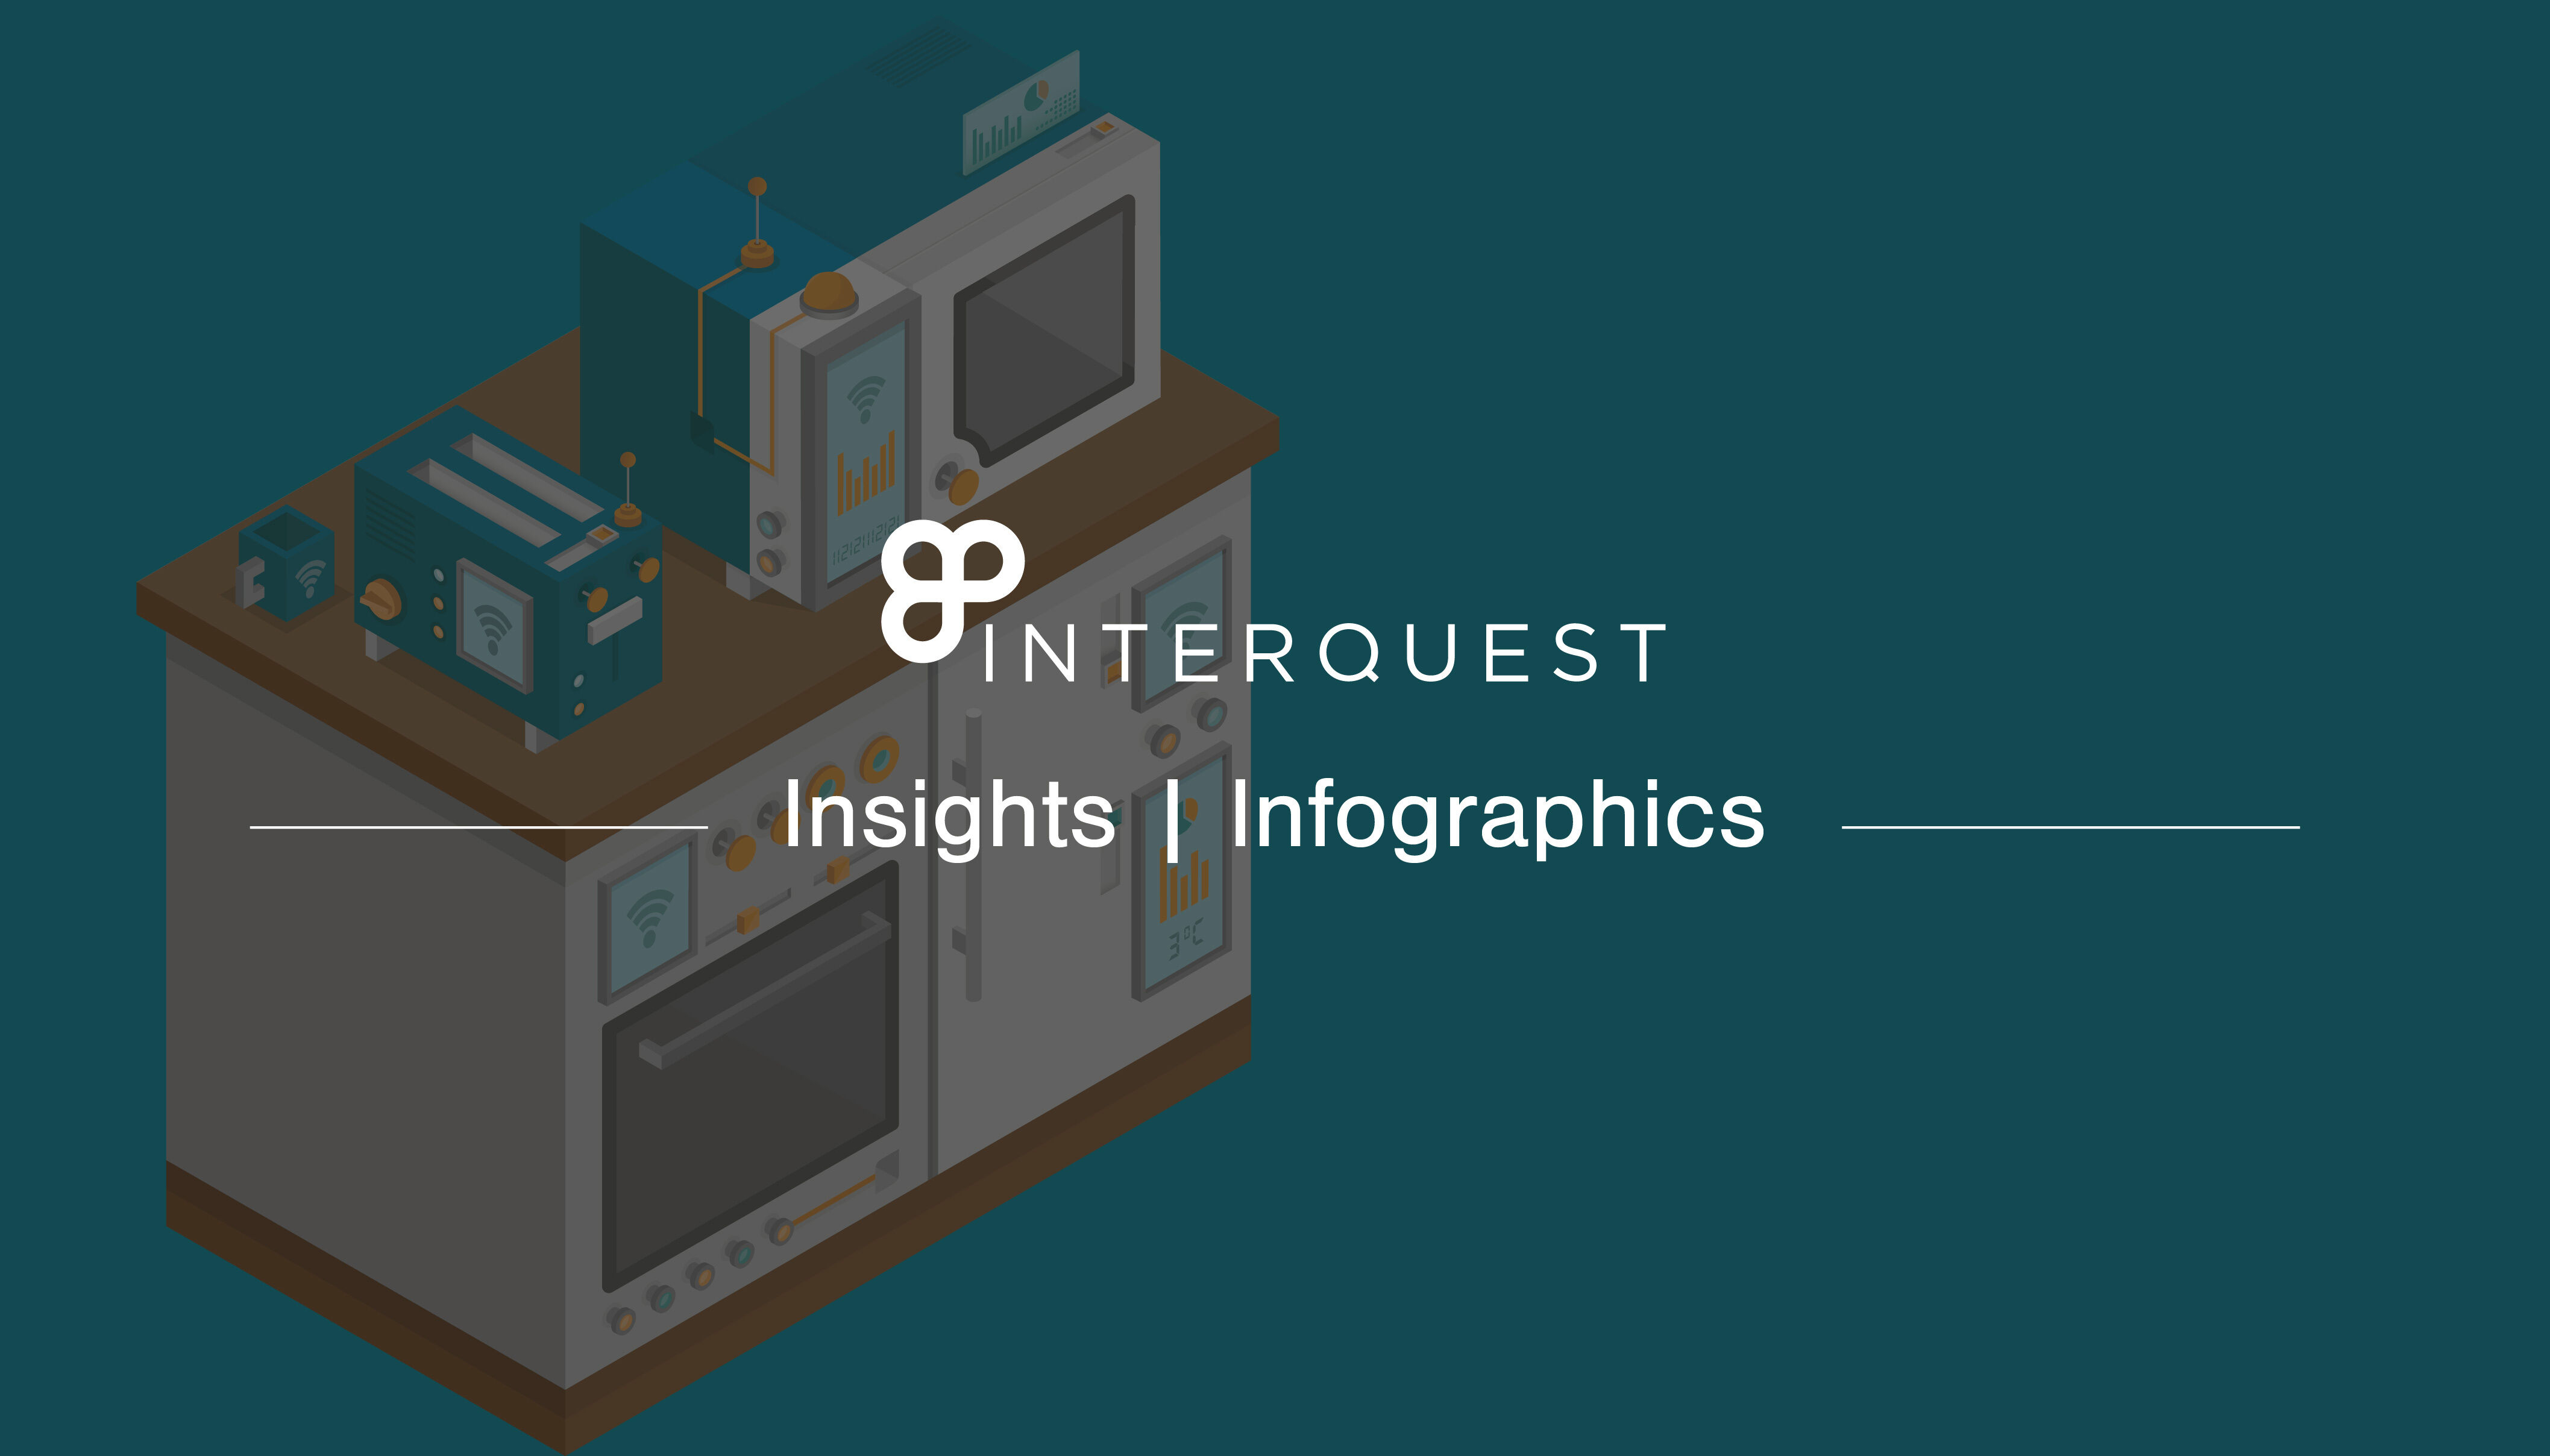 A header banner for an infographic about the internet of things InterQuest branded